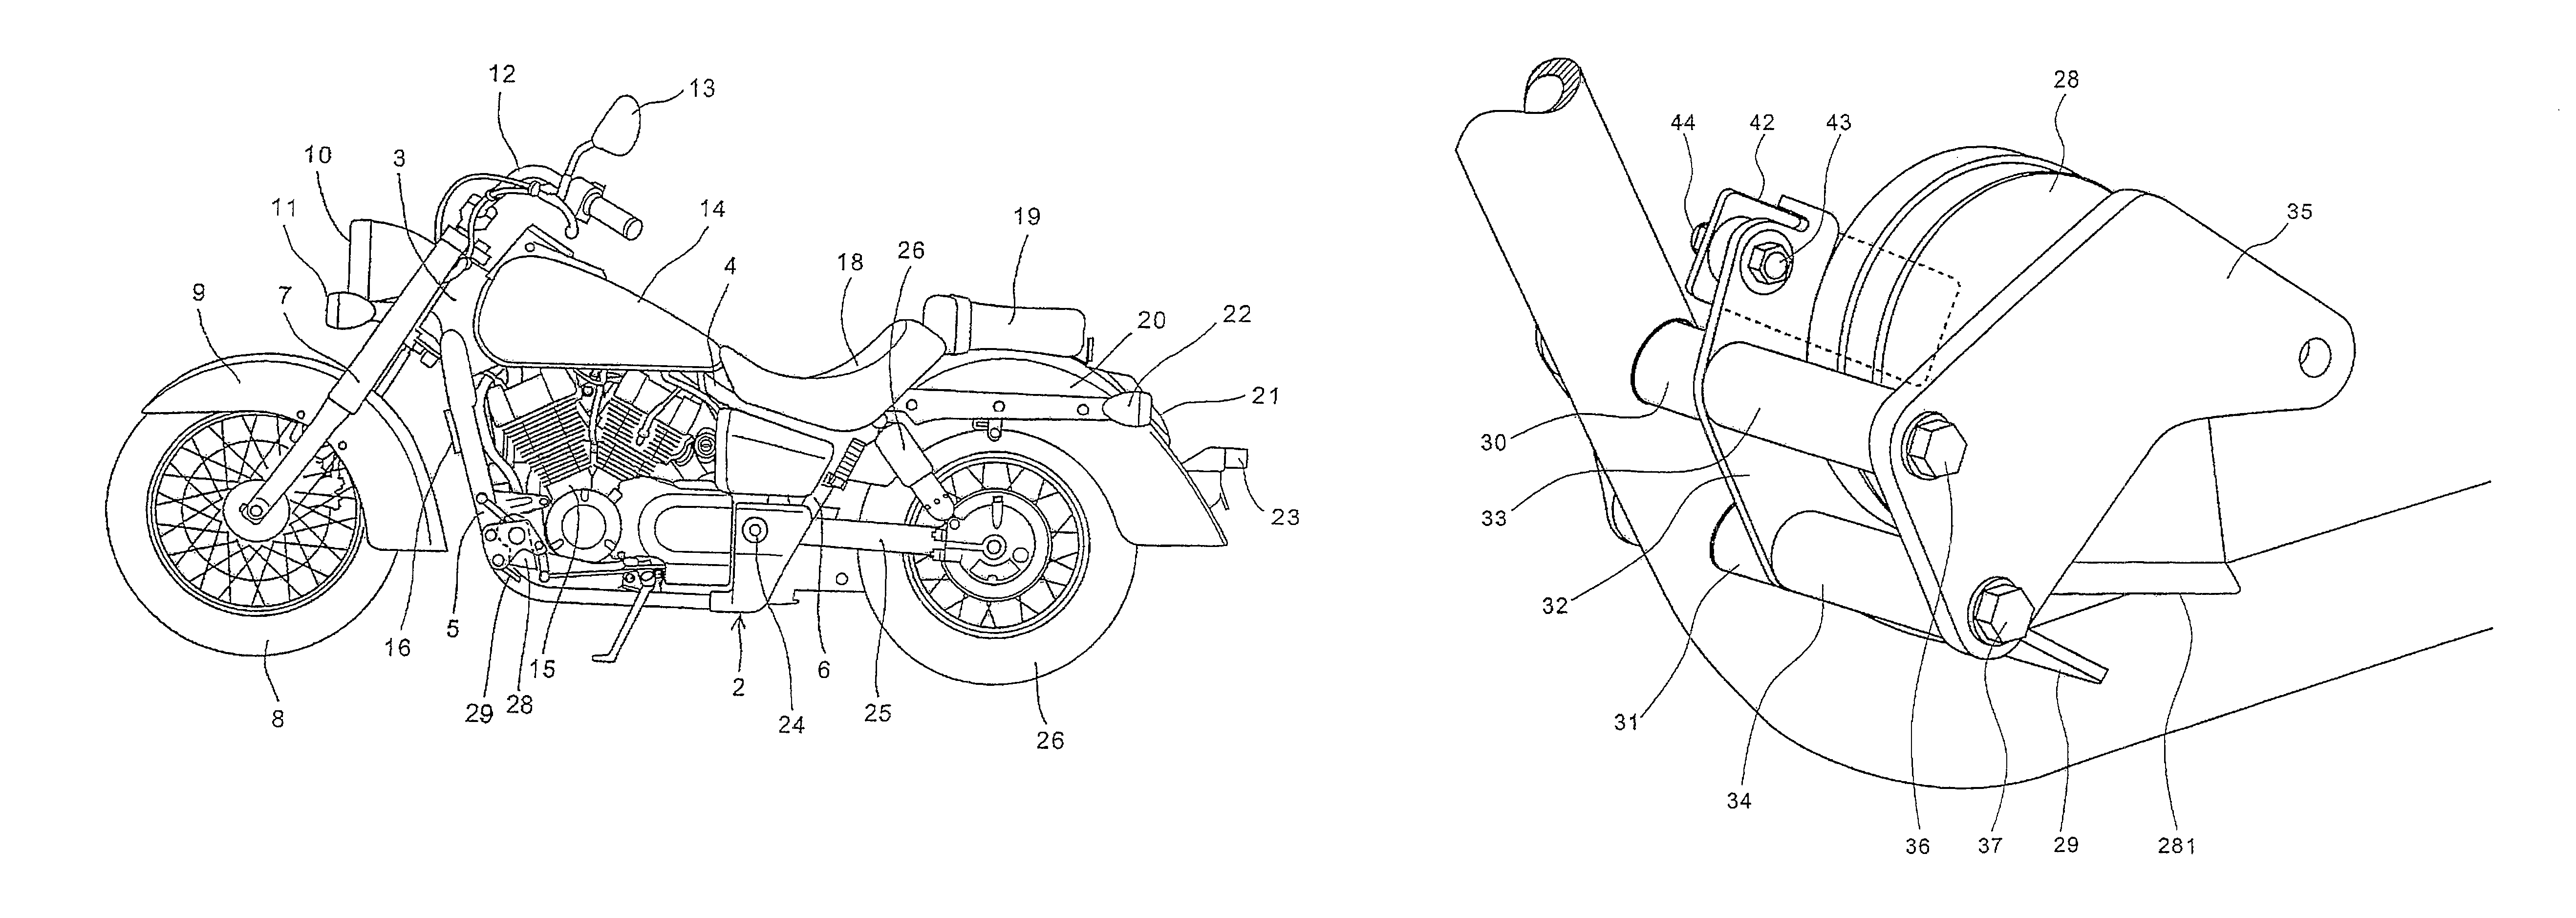 Horn guard device for motorcycle